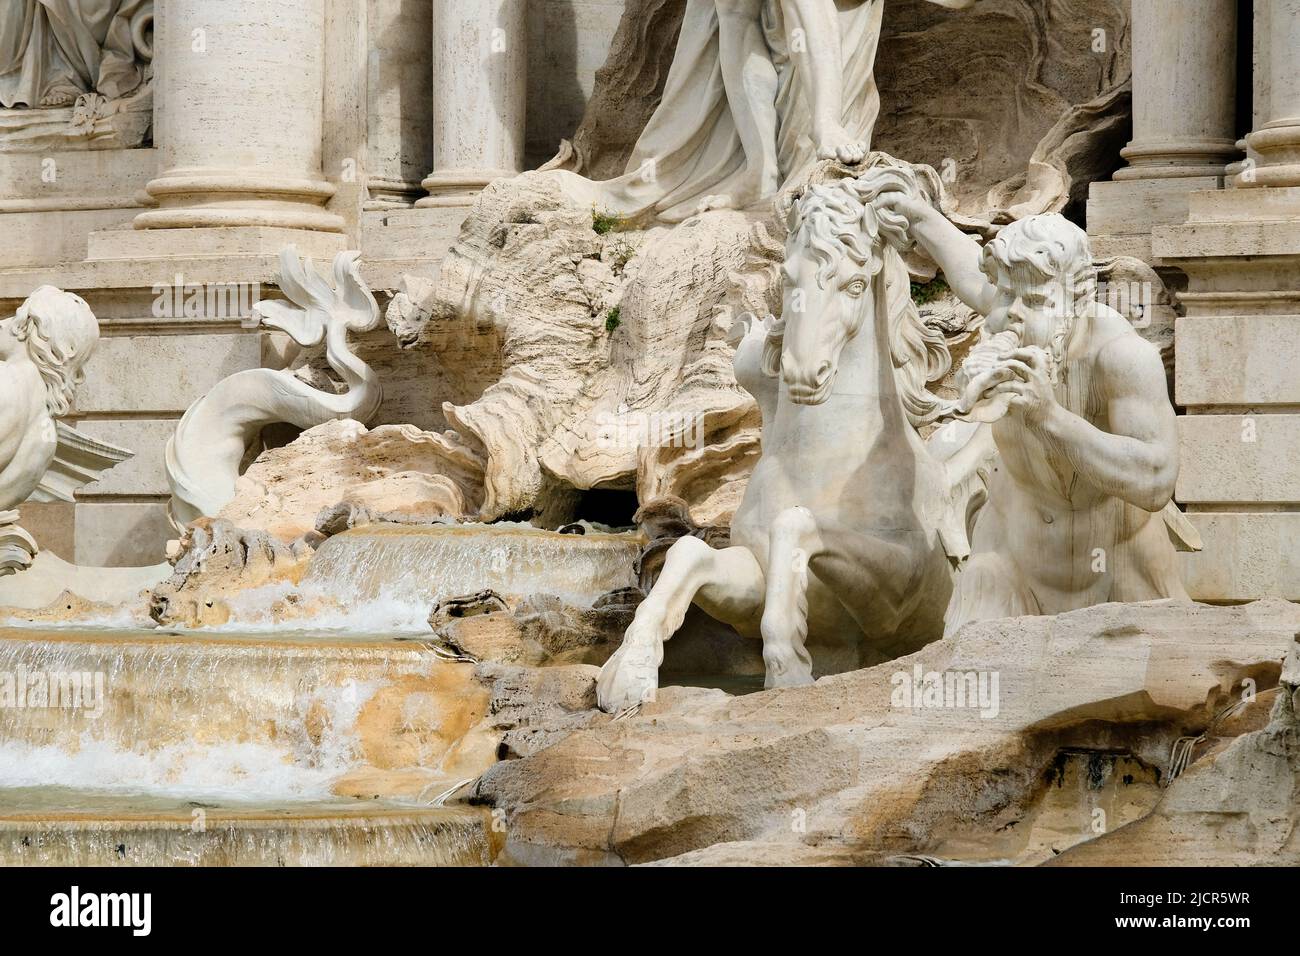 Rome, Italy - June 5, 2022: Detailed image of Trevi Fountain in Rome. Stock Photo